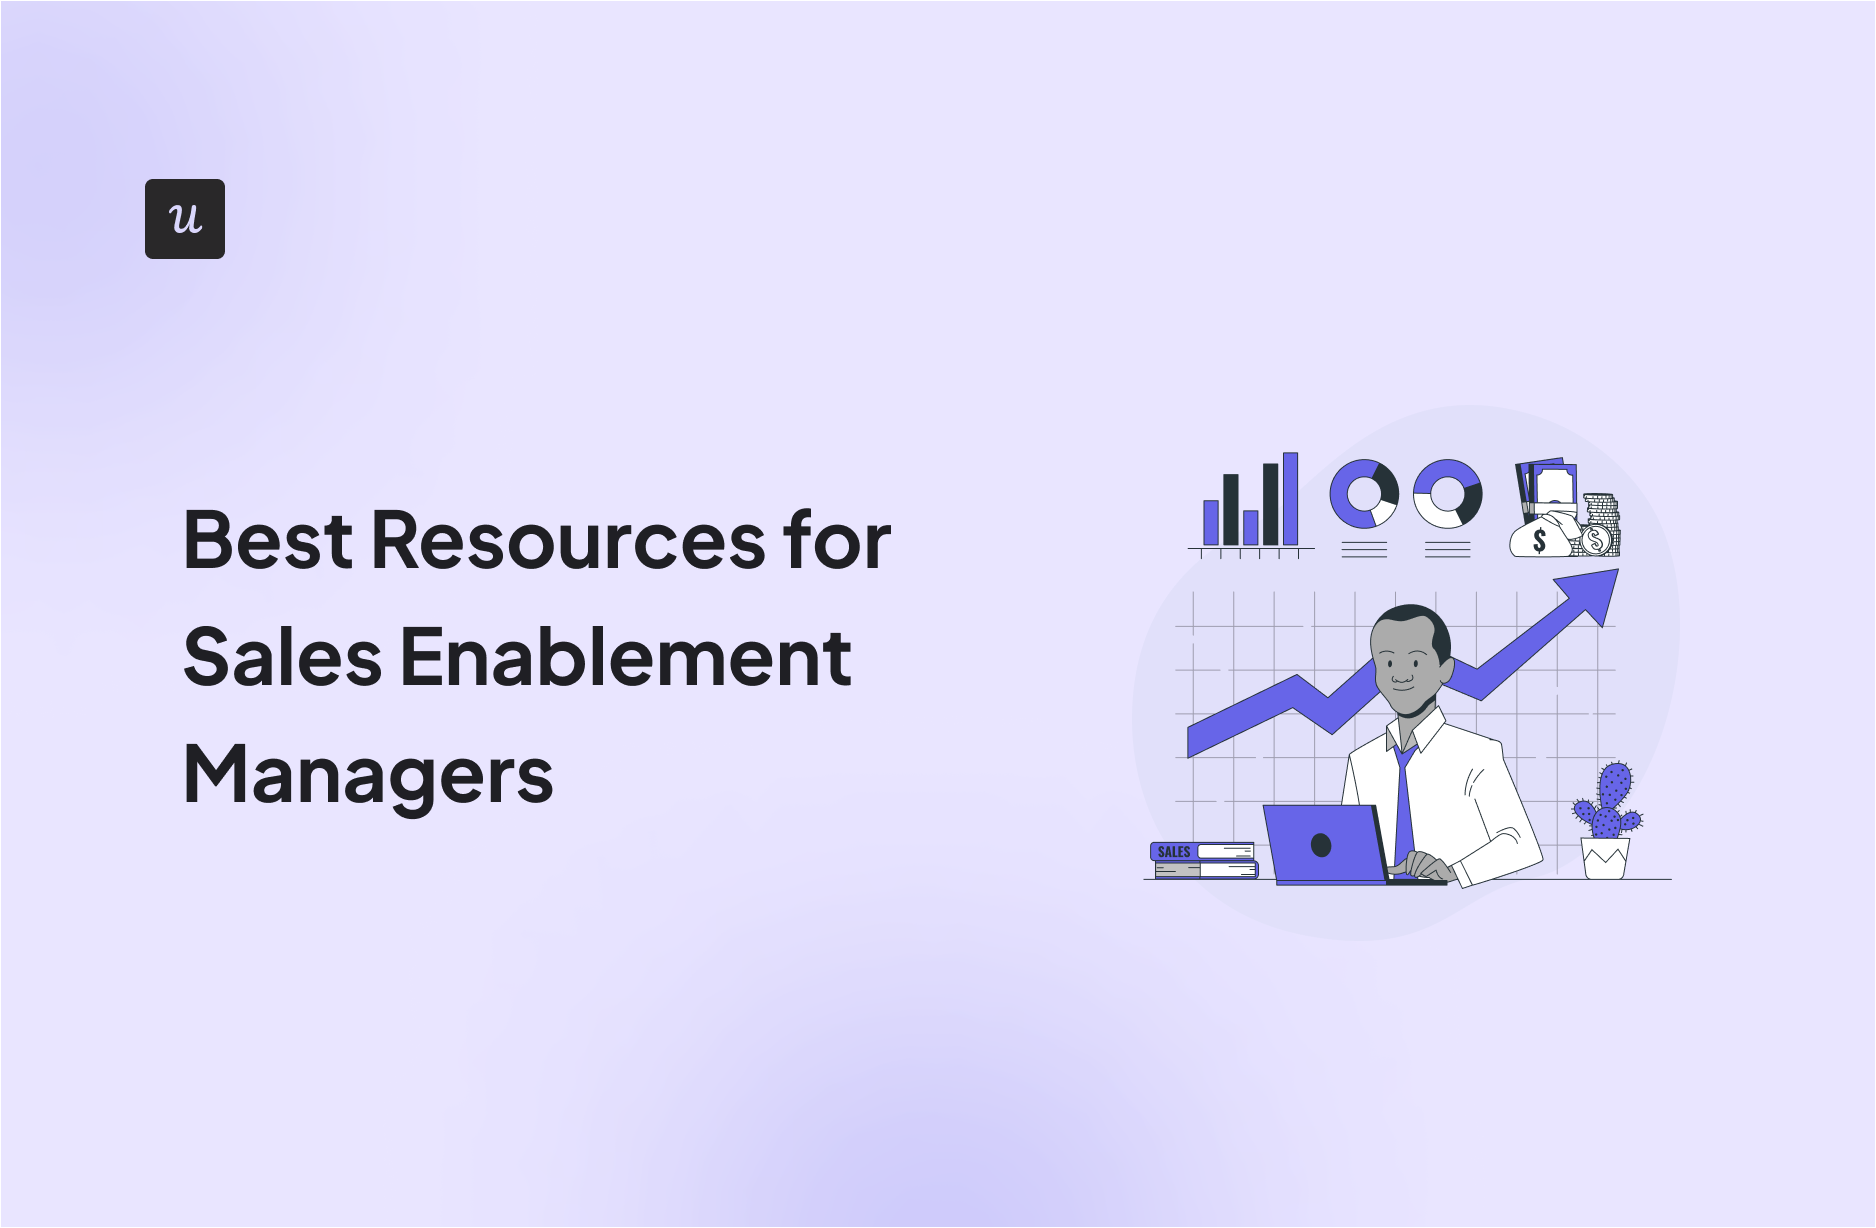 Best Resources for Sales Enablement Managers